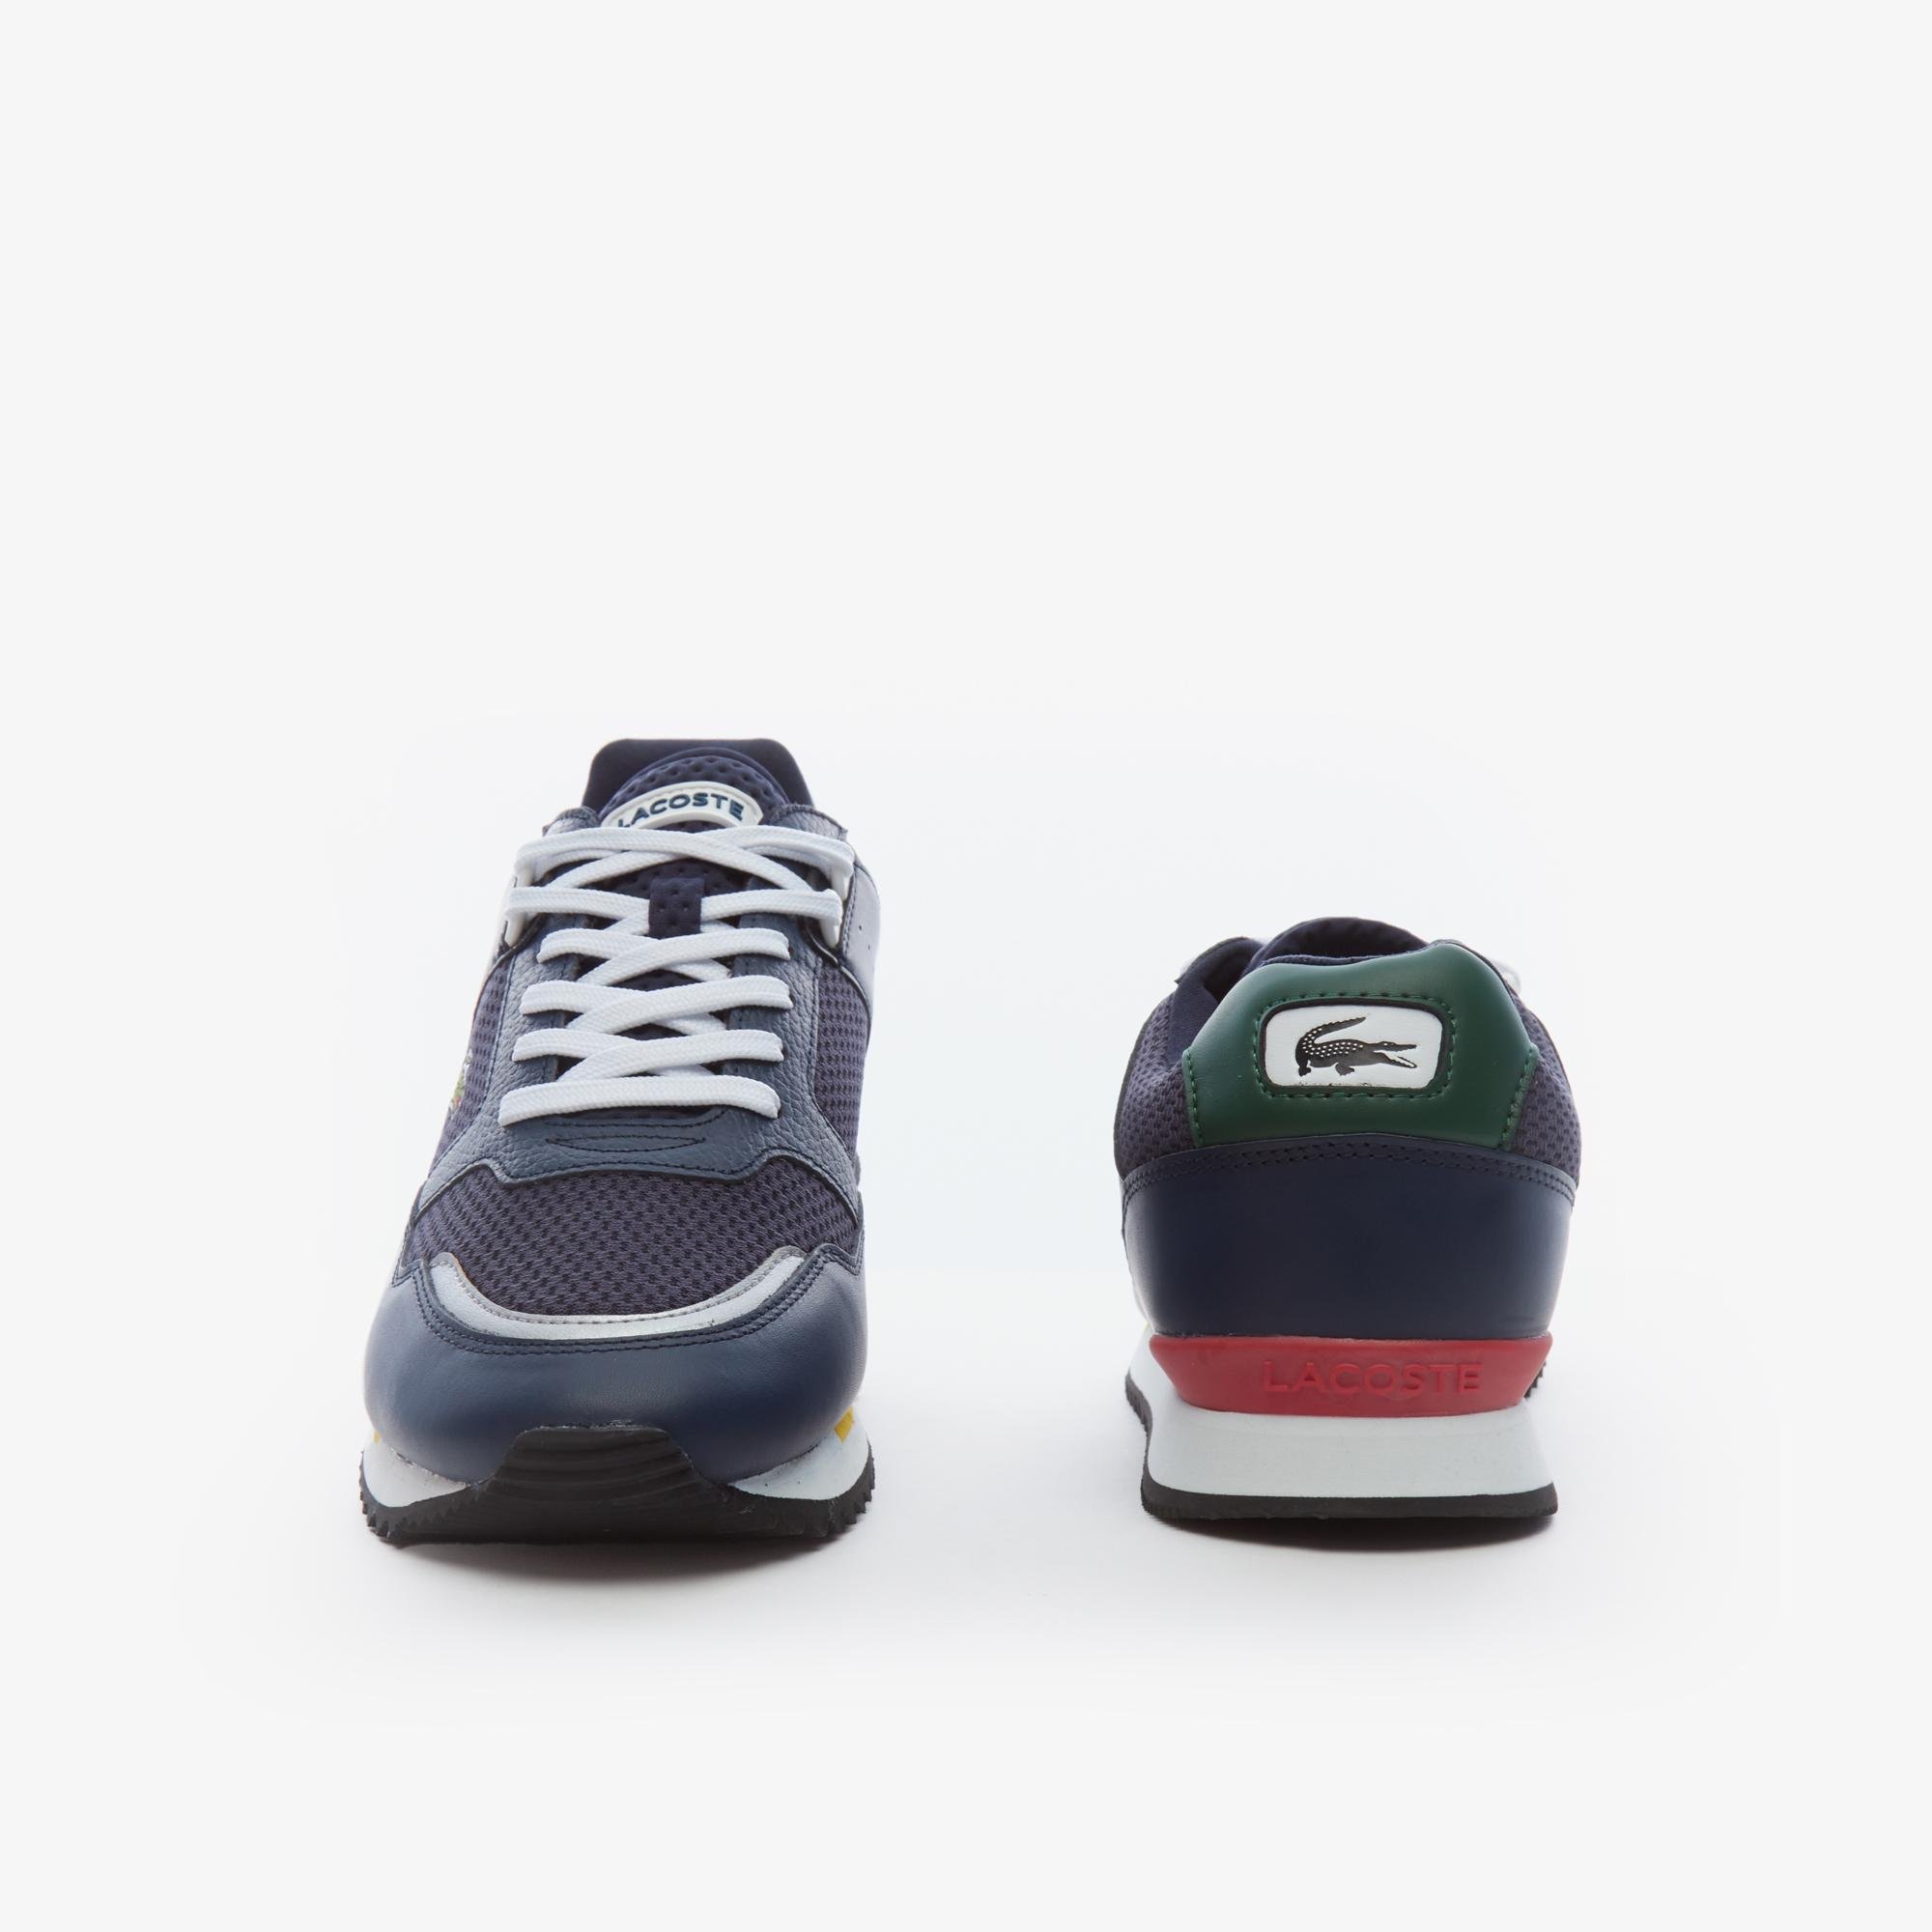 Lacoste Men's Partner Piste Textile and Leather Trainers